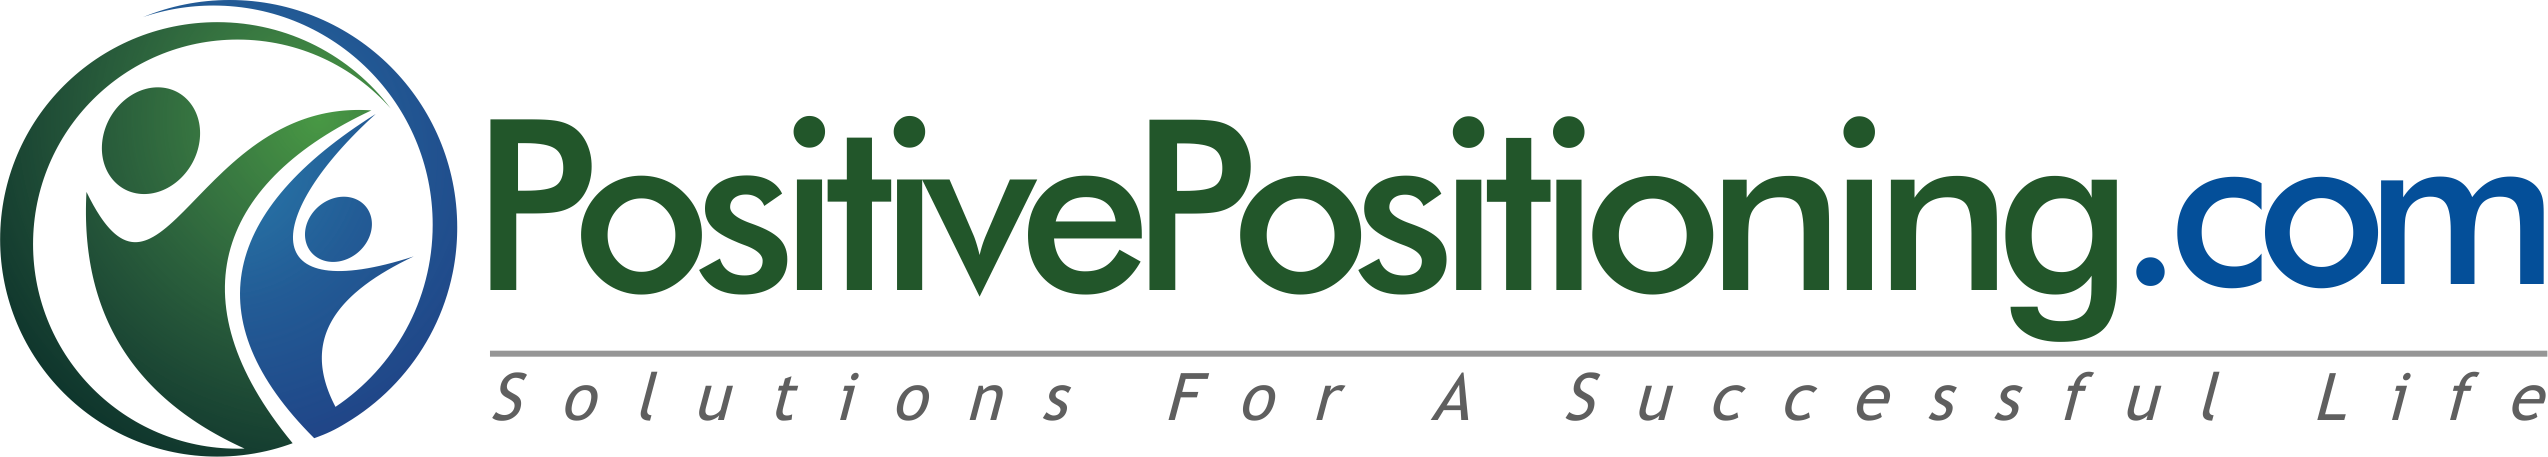 Positive Positioning Center